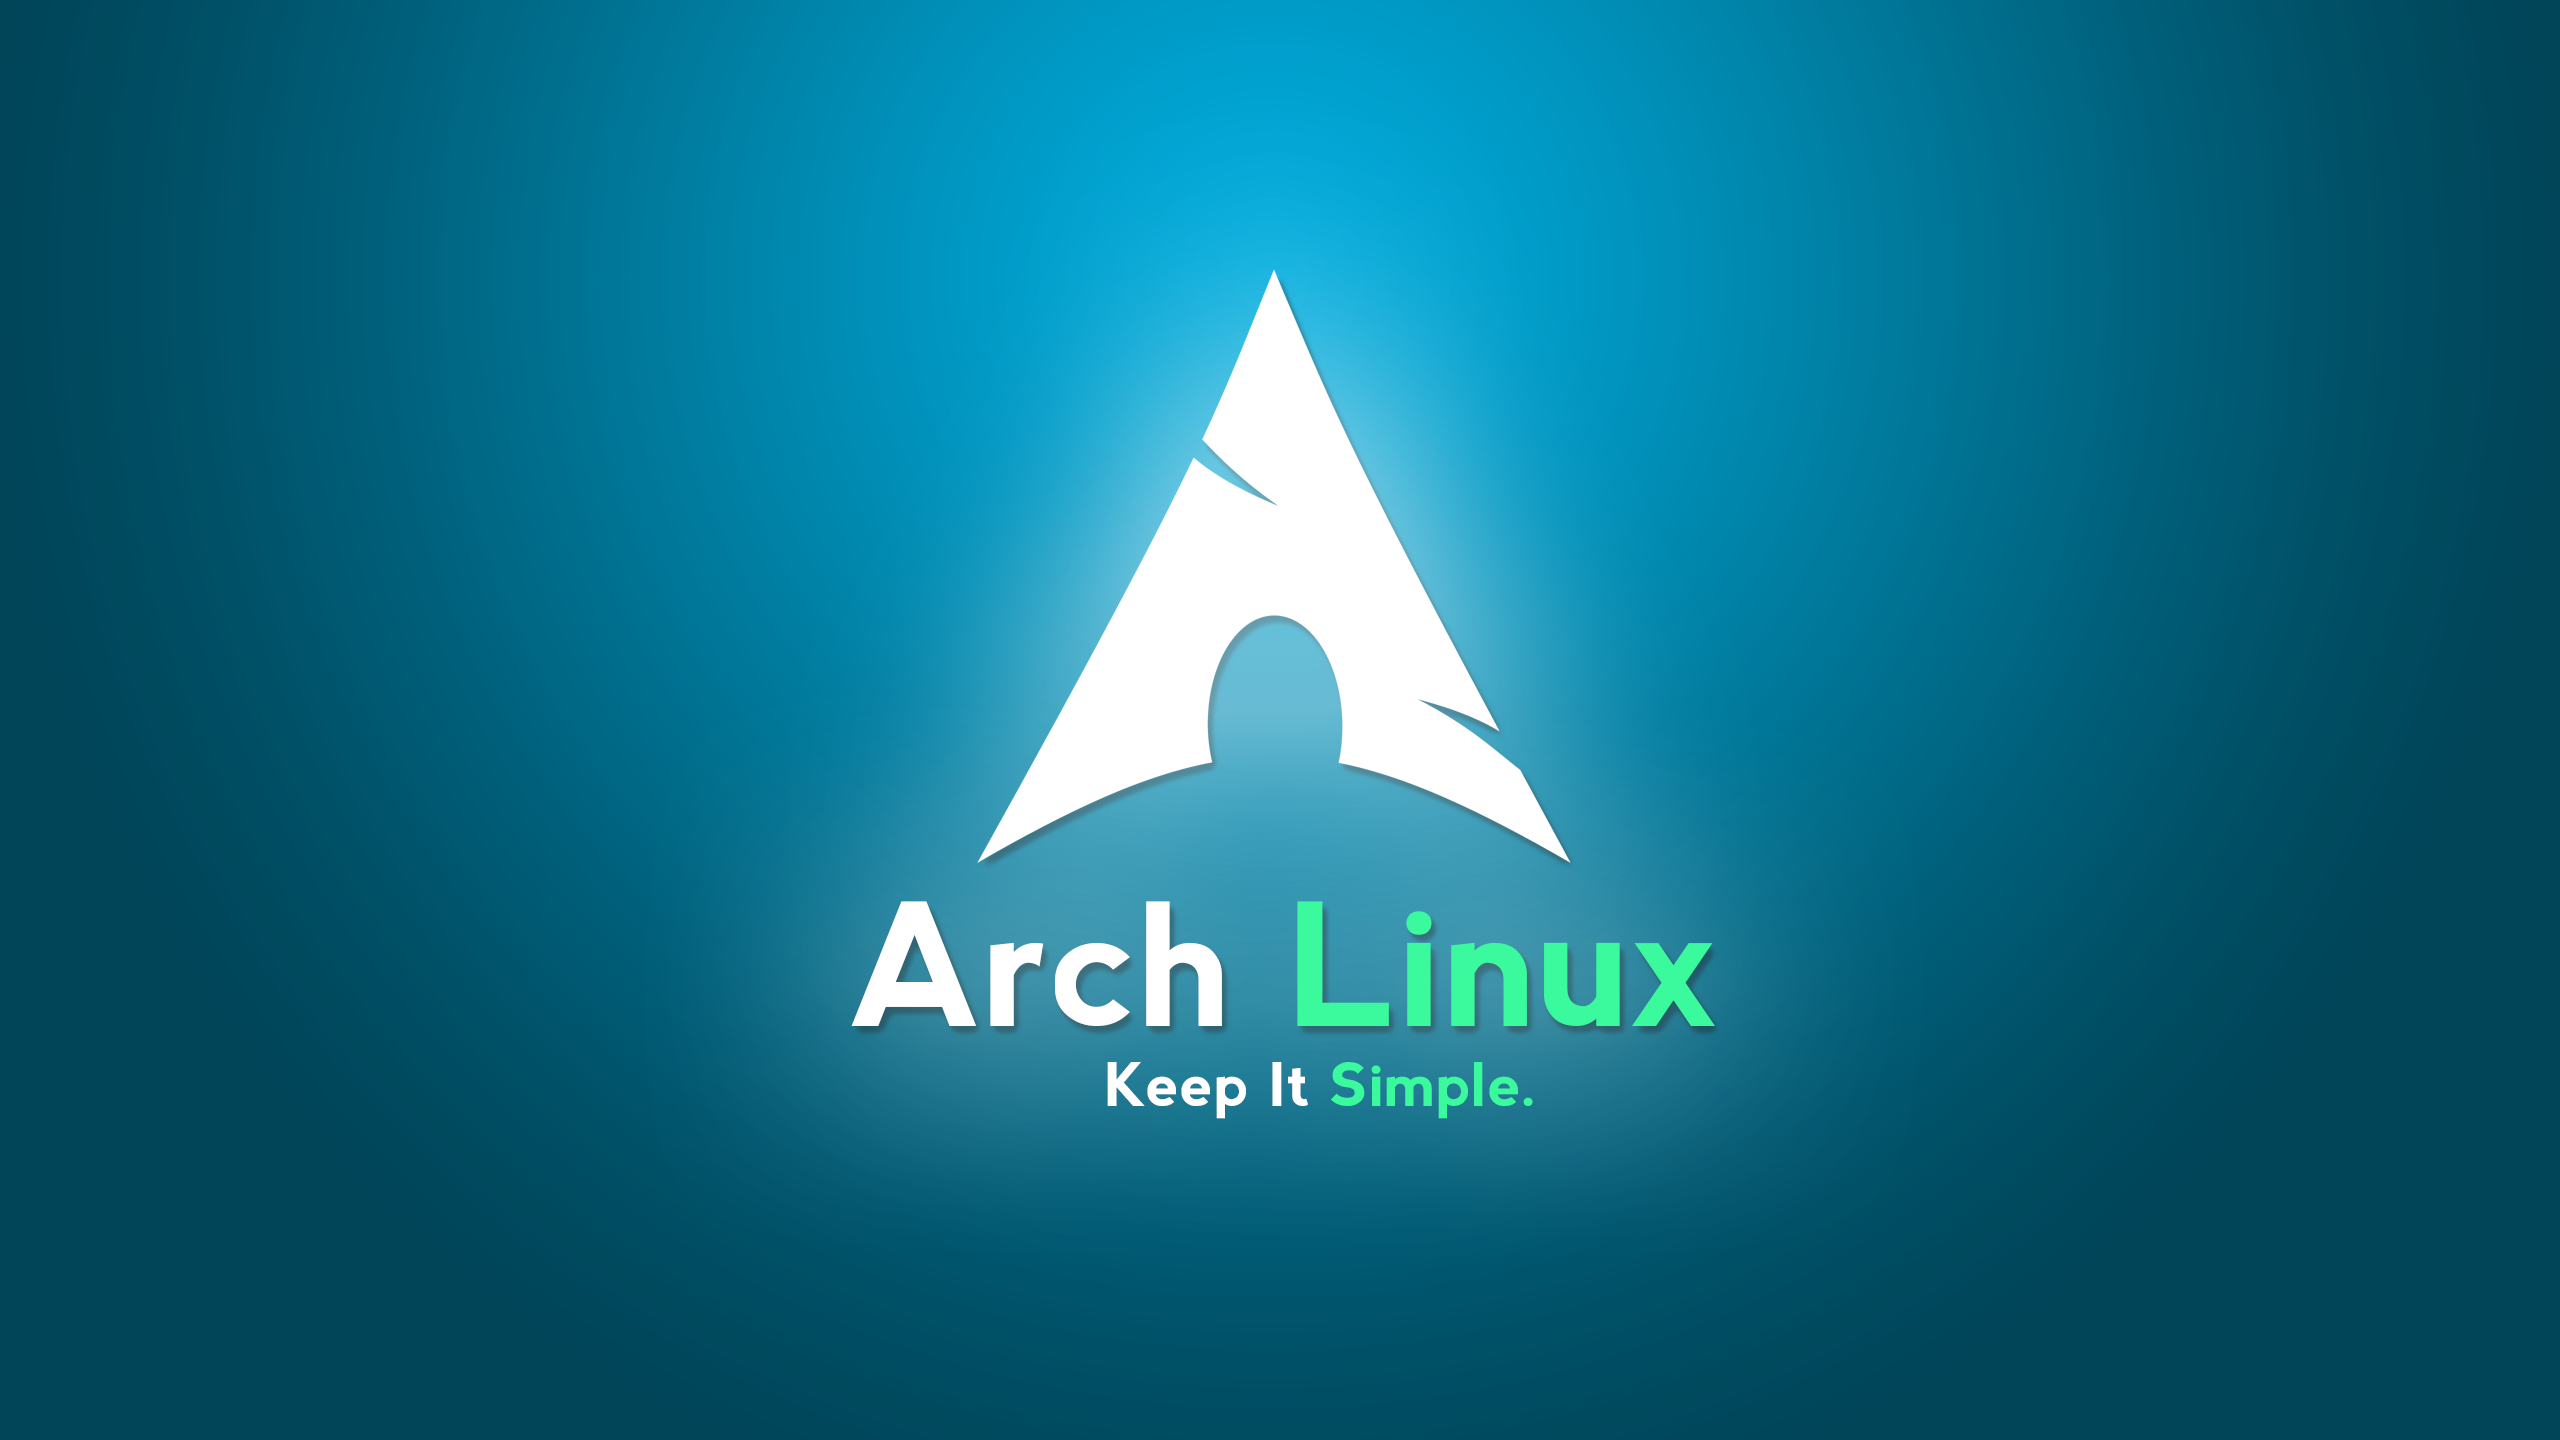 Arch Linux Wallpaper By Sullyvancraft On Deviantart